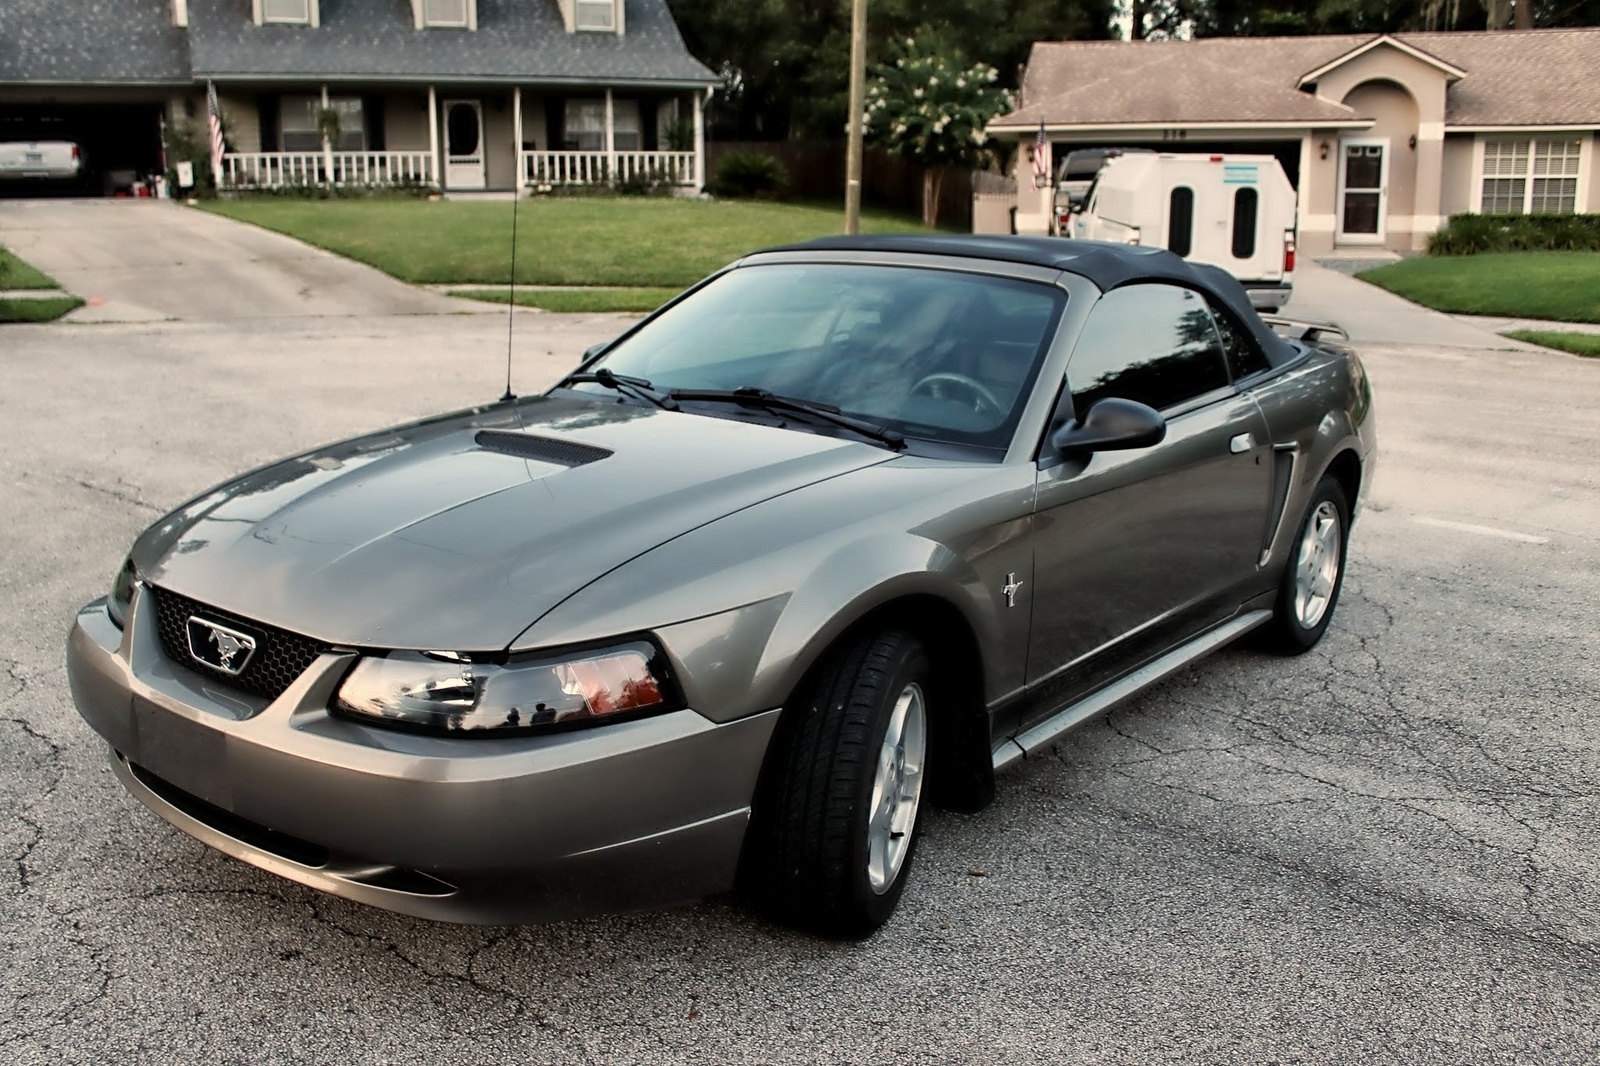 2002 Ford mustang deluxe convertible reviews #6